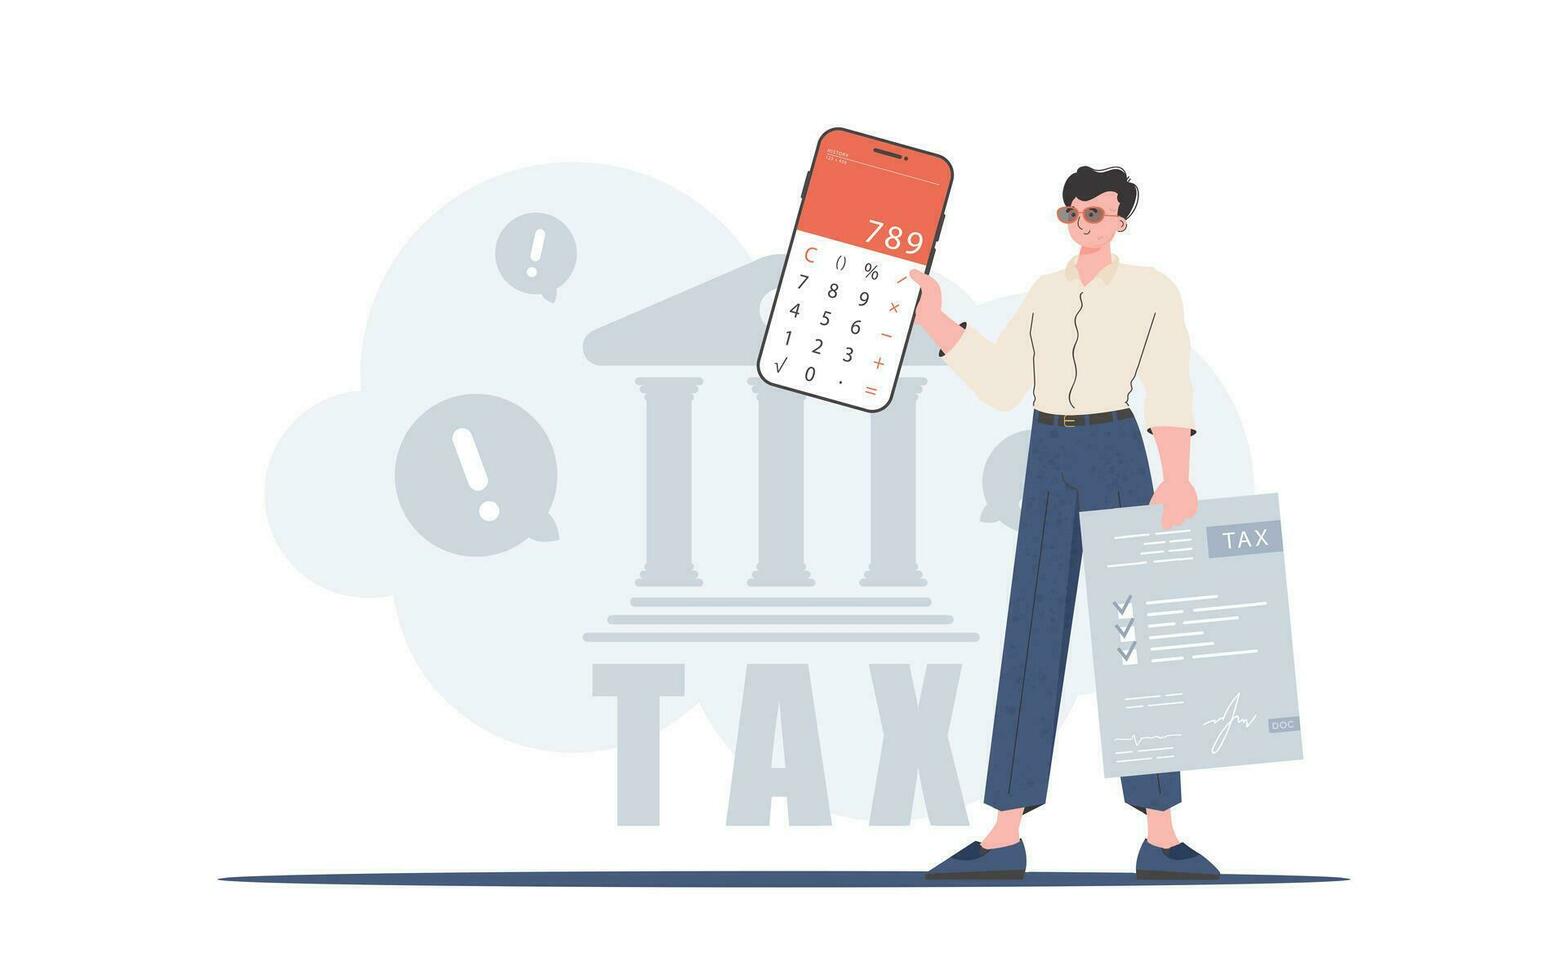 The guy is holding a calculator and a tax form in his hands. The concept of payment and calculation of taxes. Vector illustration in a flat style.